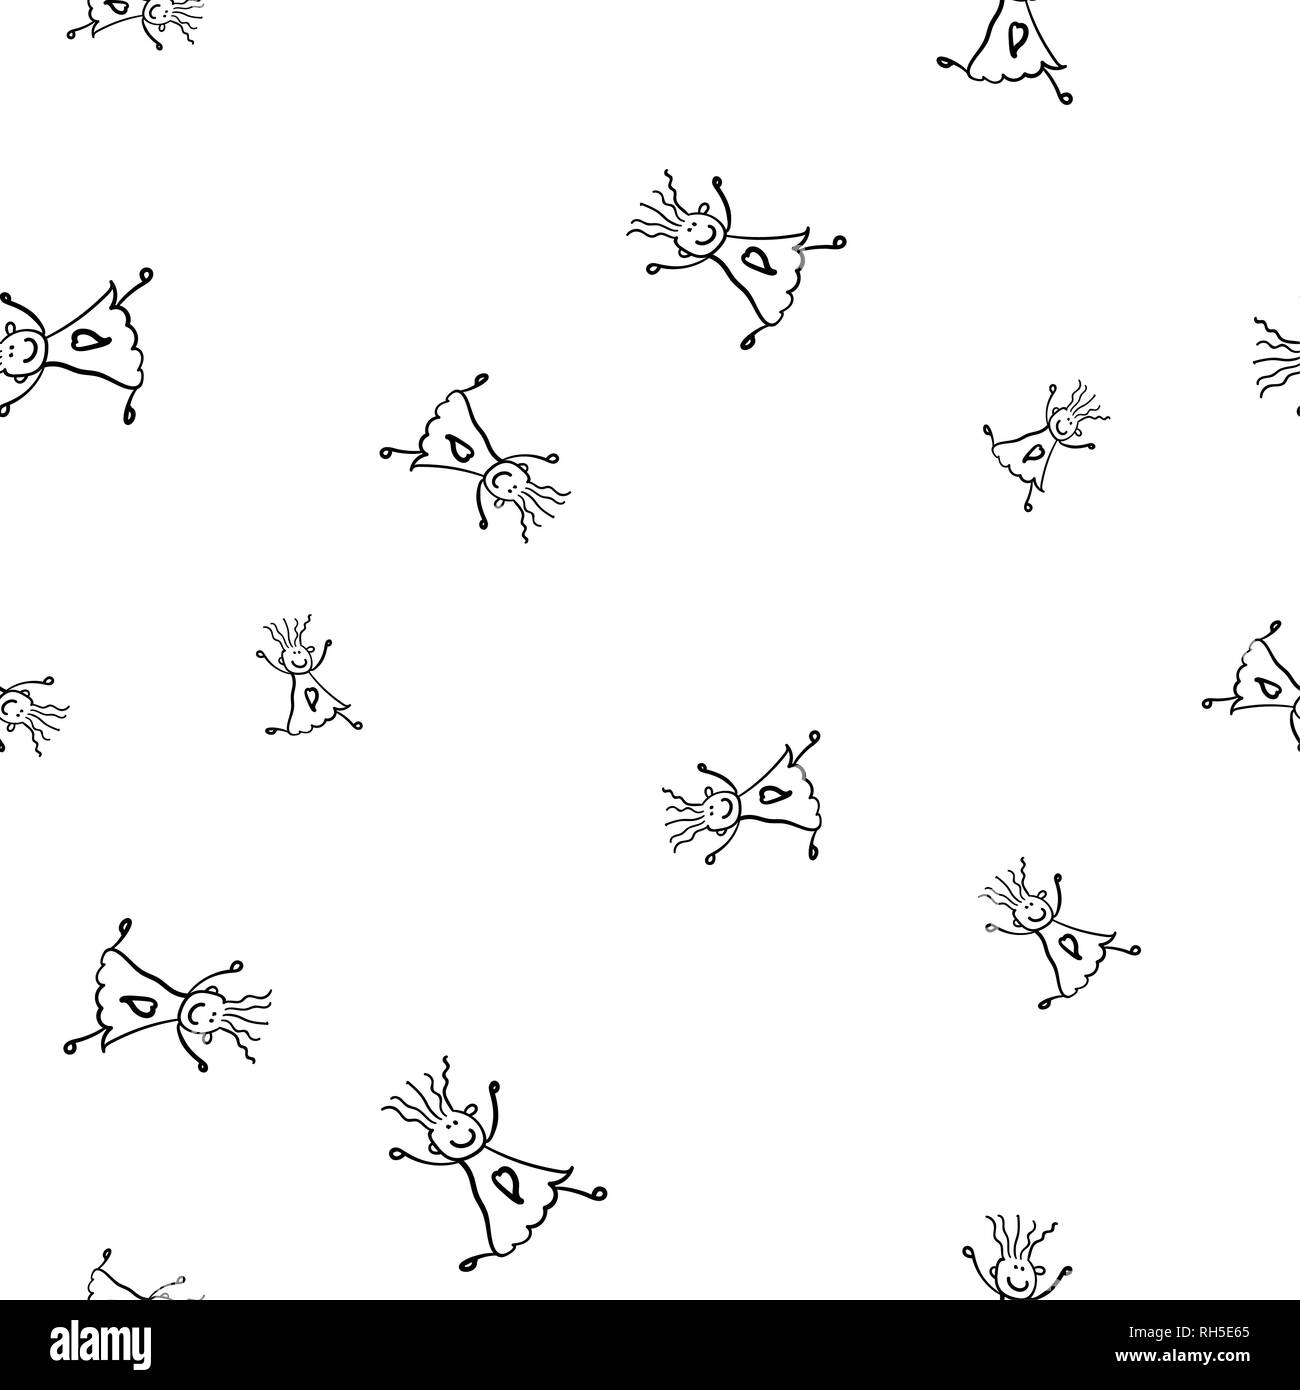 Kids seamless pattern in doodle style.  illustration on white background. Stock Photo